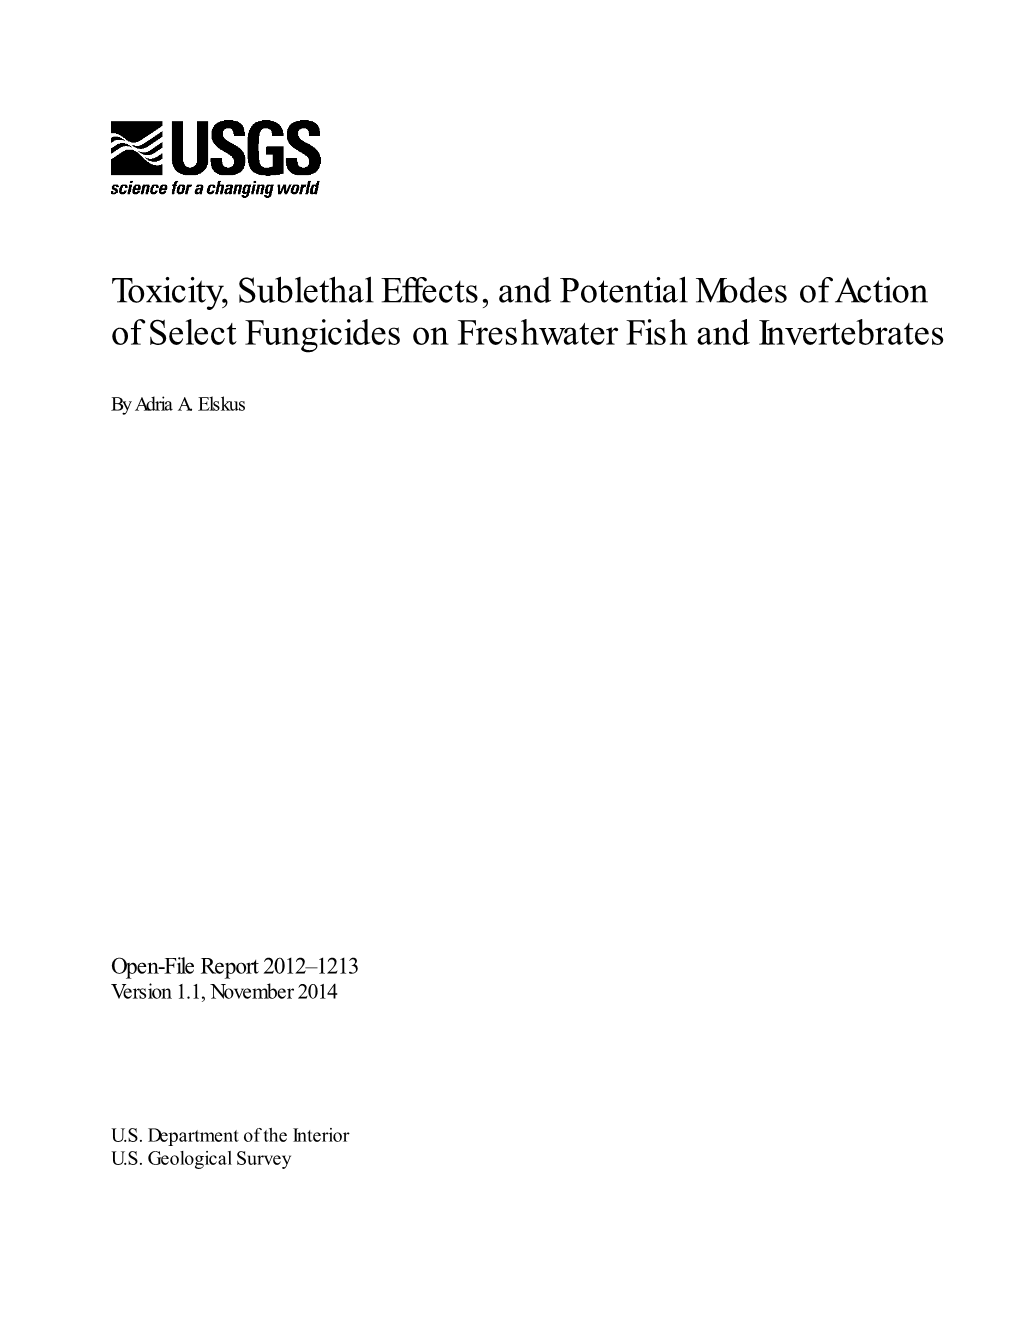 Toxicity, Sublethal Effects, and Potential Modes of Action of Select Fungicides on Freshwater Fish and Invertebrates